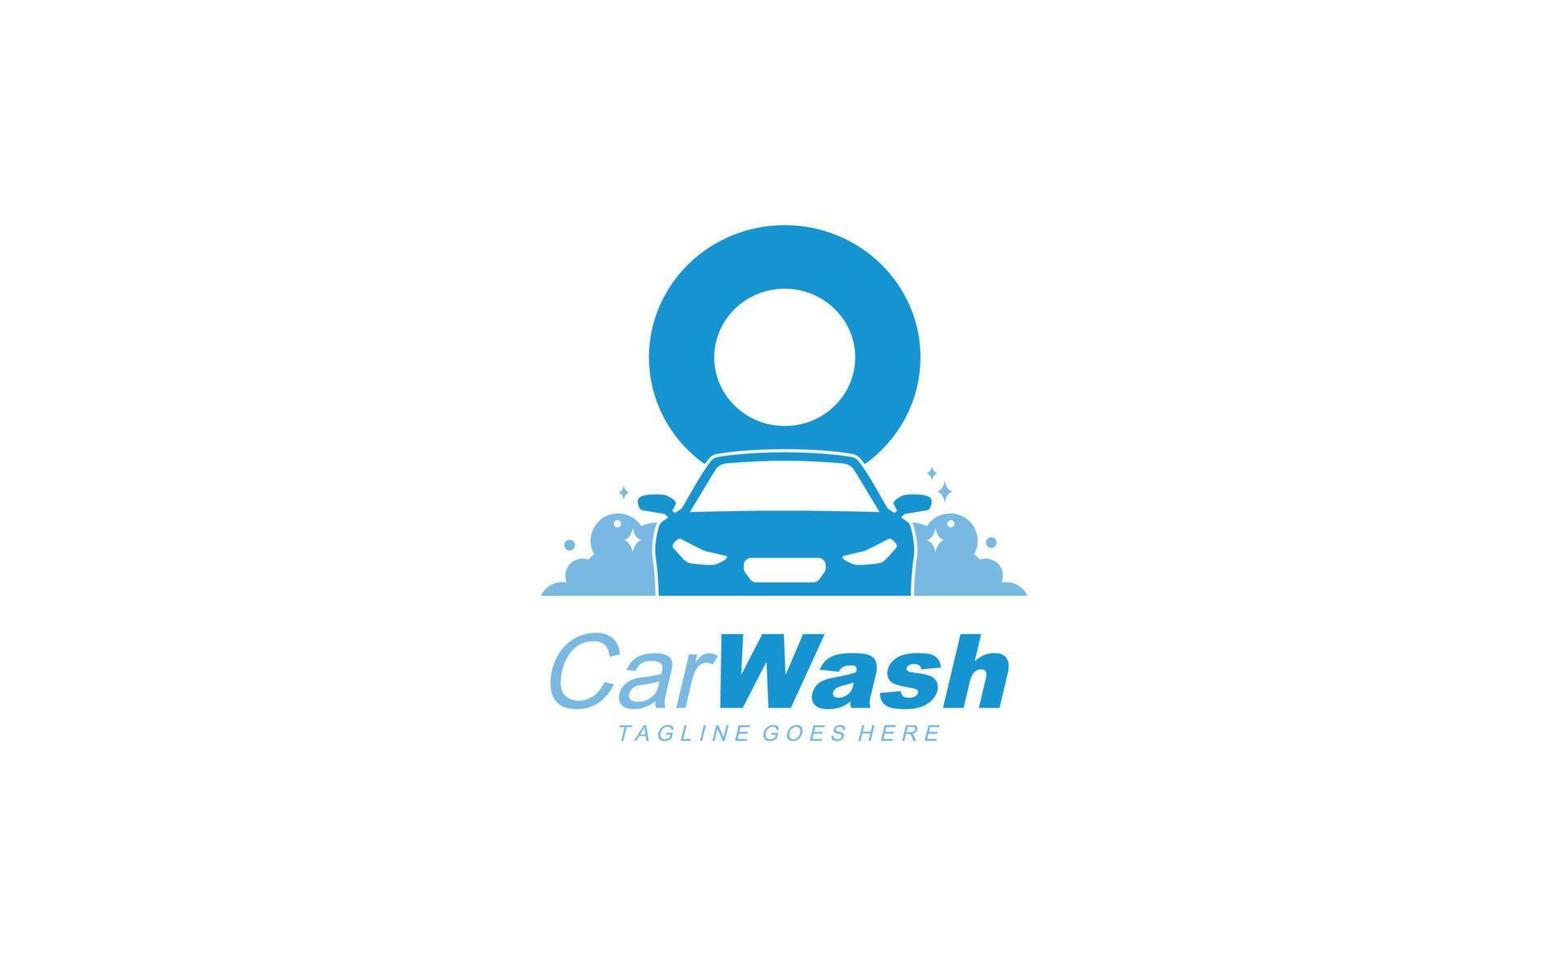 O logo carwash for identity. car template vector illustration for your brand.